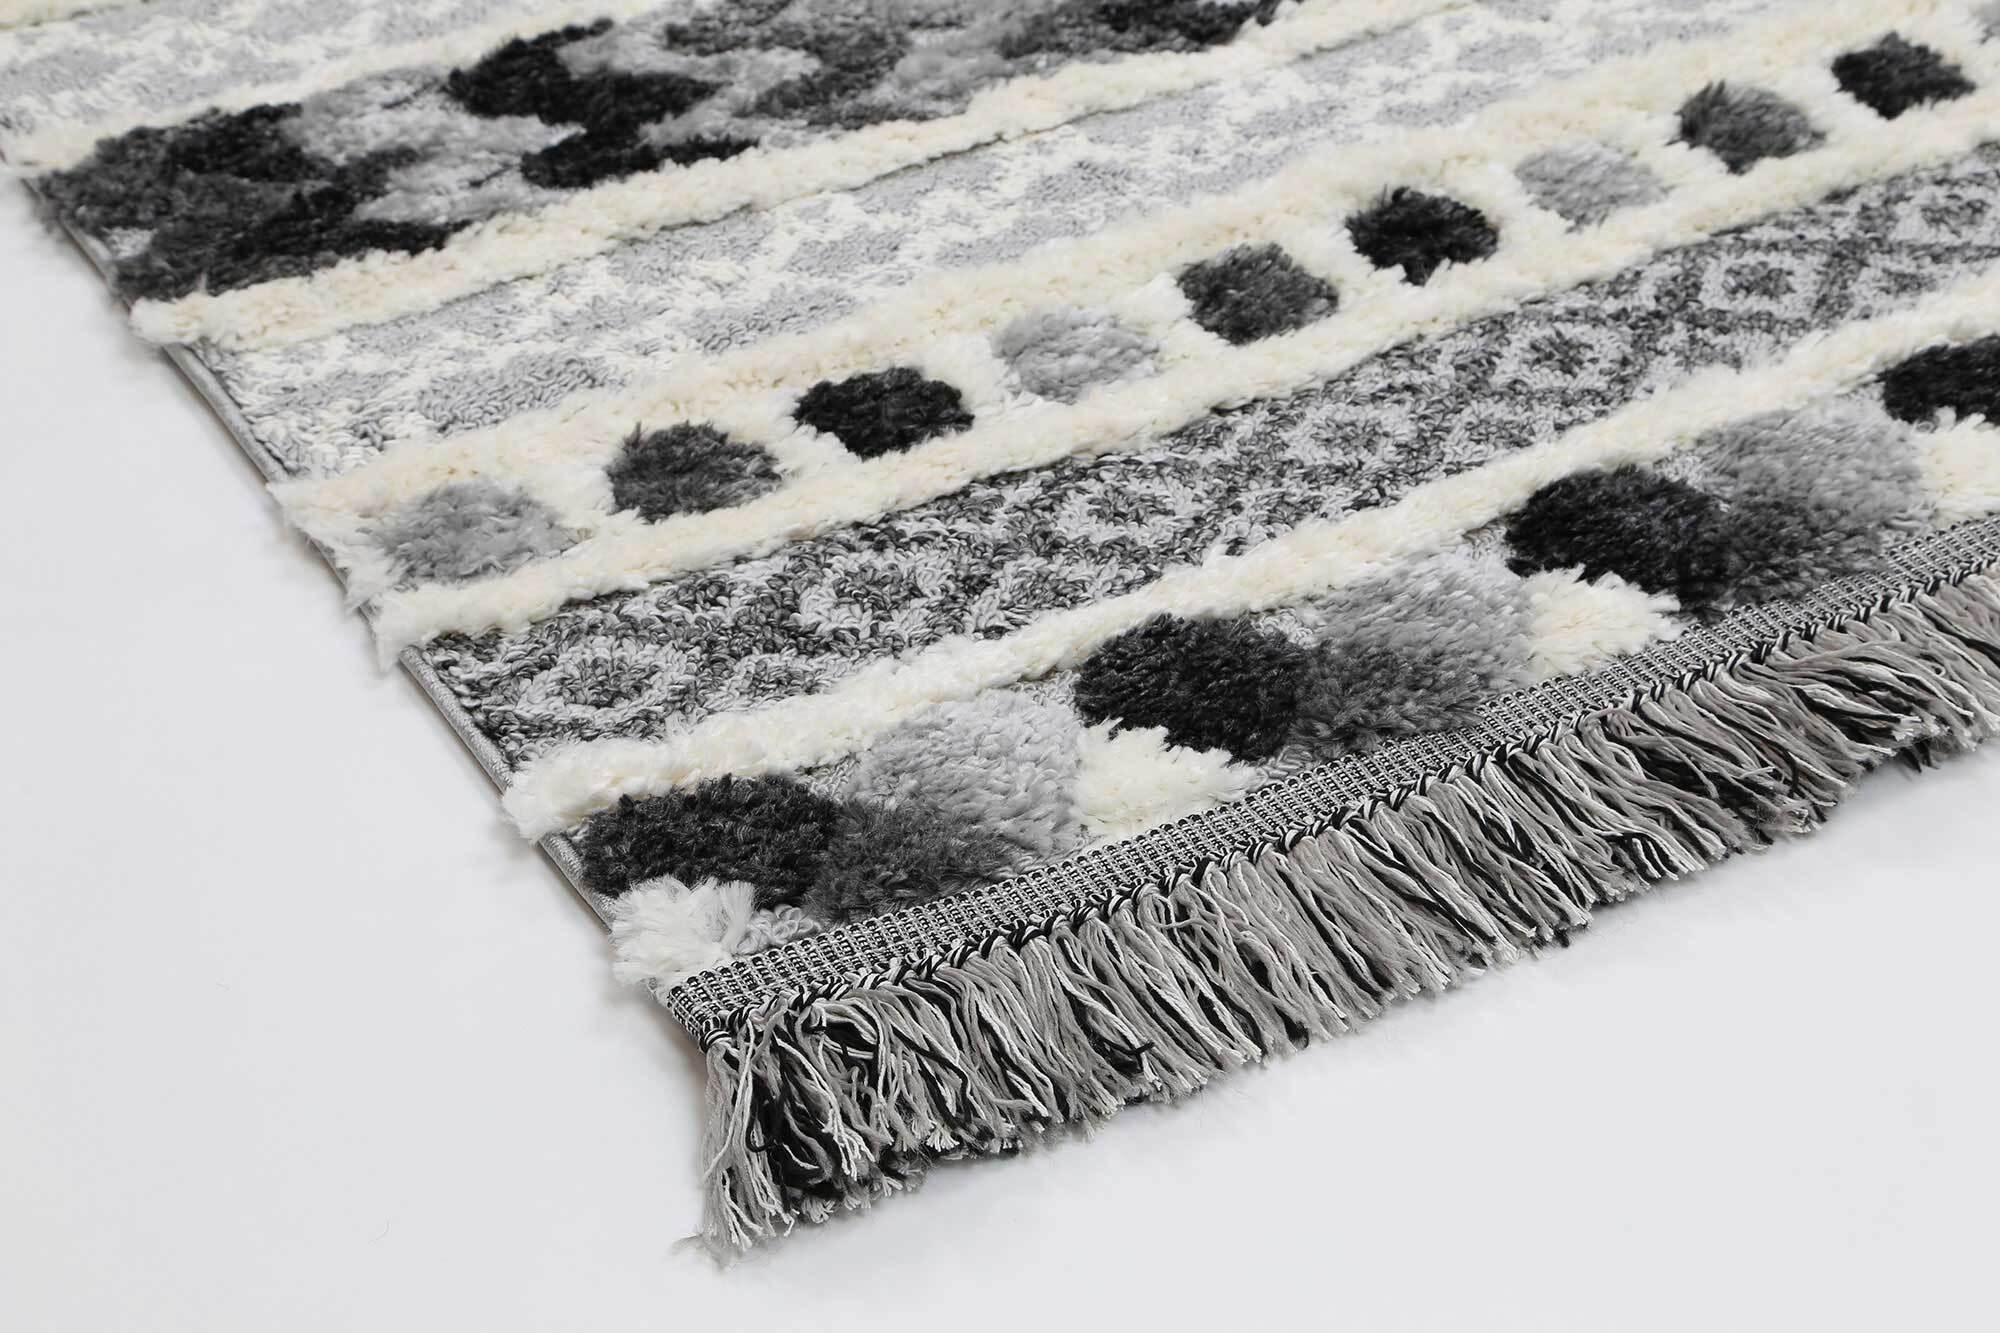 Kevin Moroccan Striped Tribal Rug